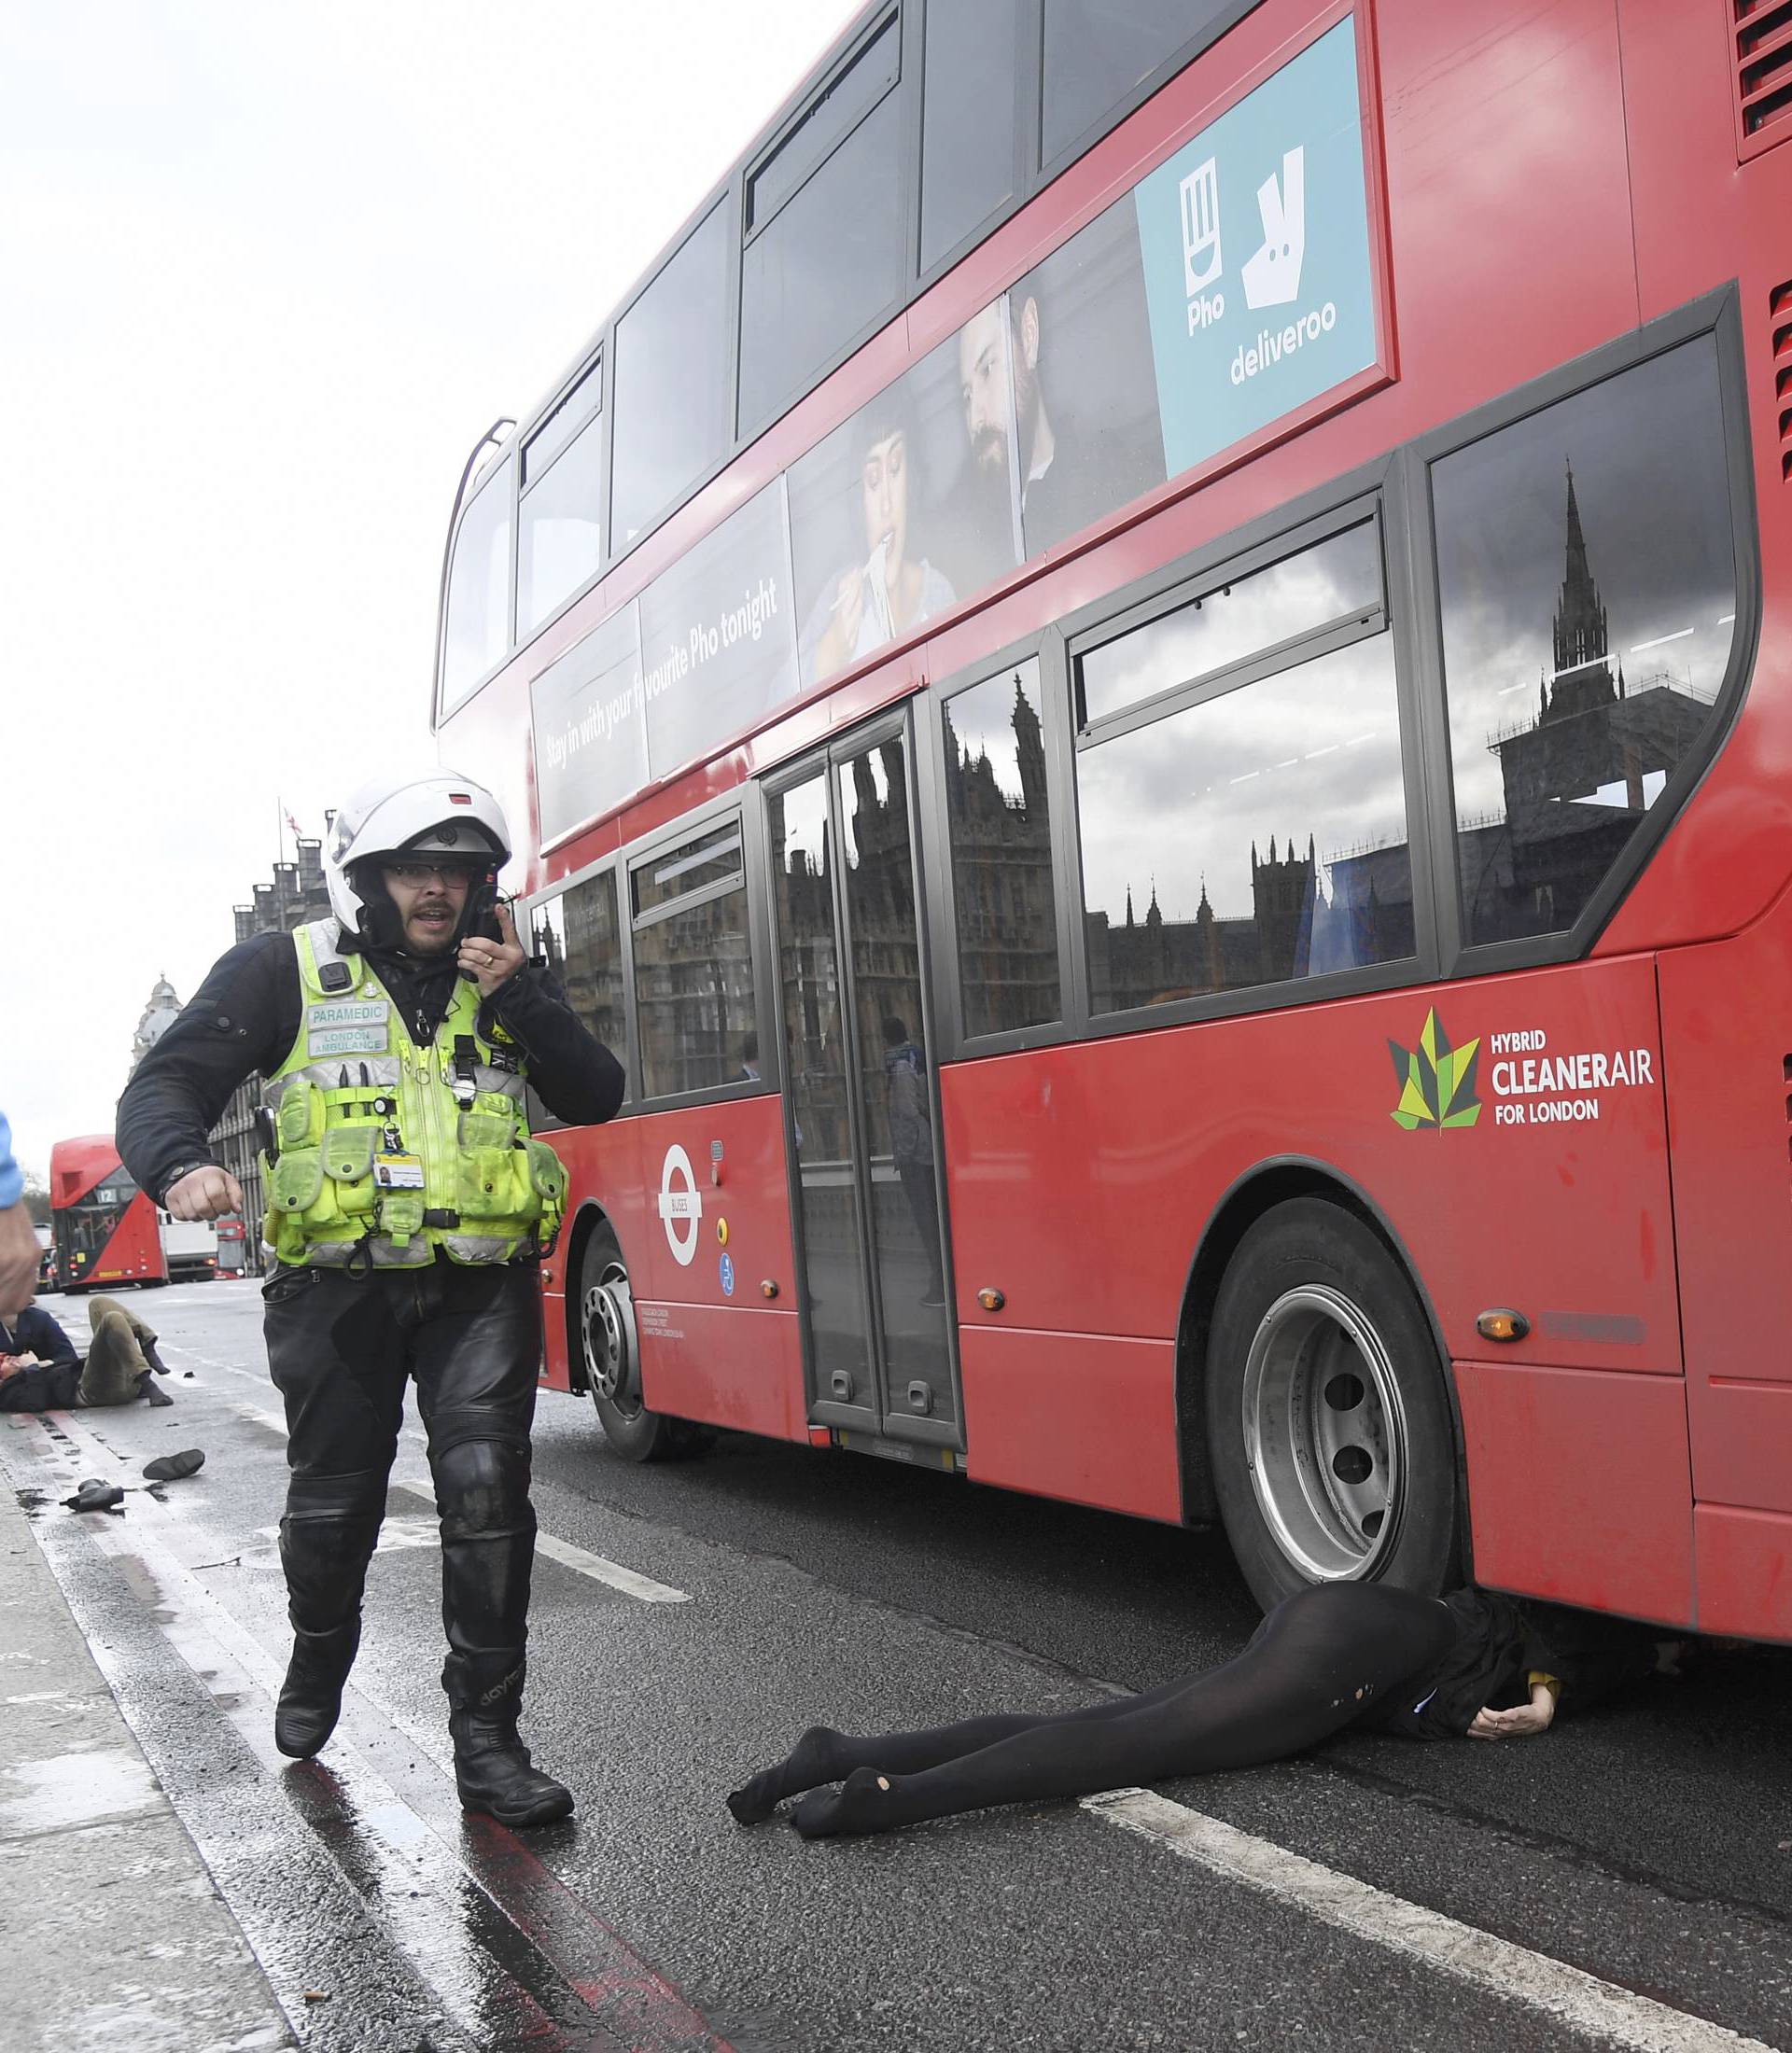 A woman lies injured after an incident on Westminster Bridge in London